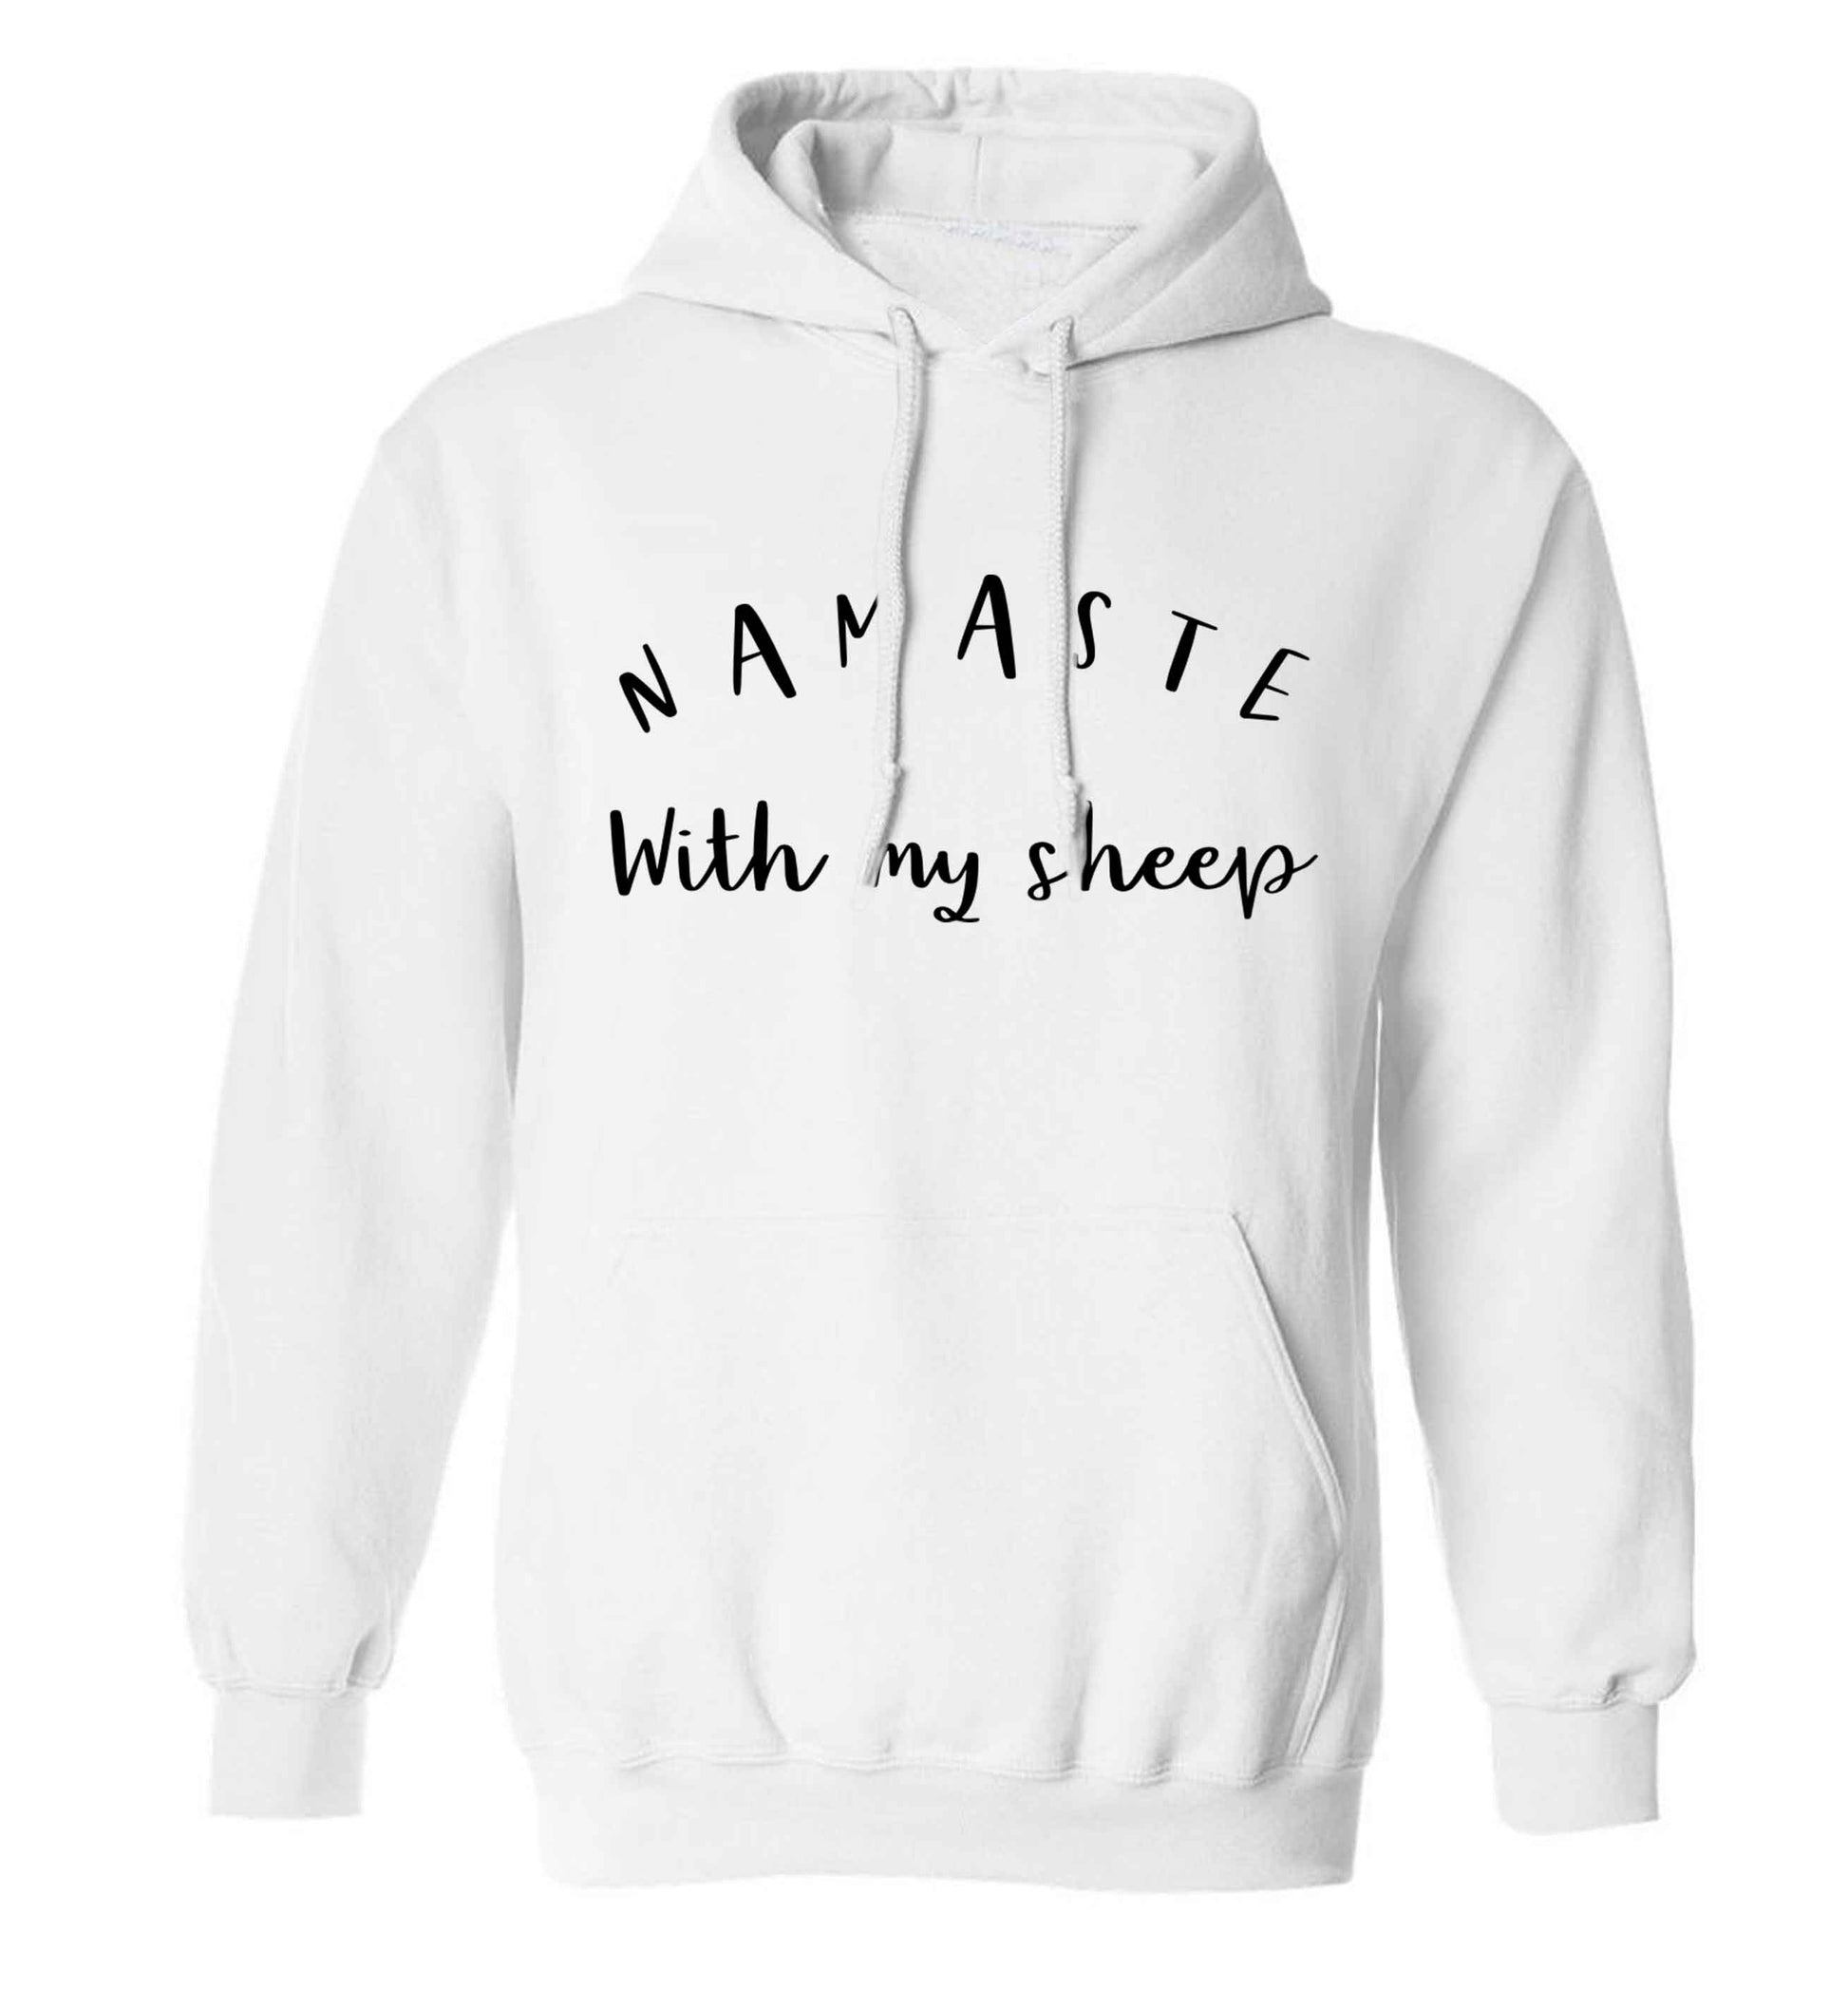 Namaste with my sheep adults unisex white hoodie 2XL